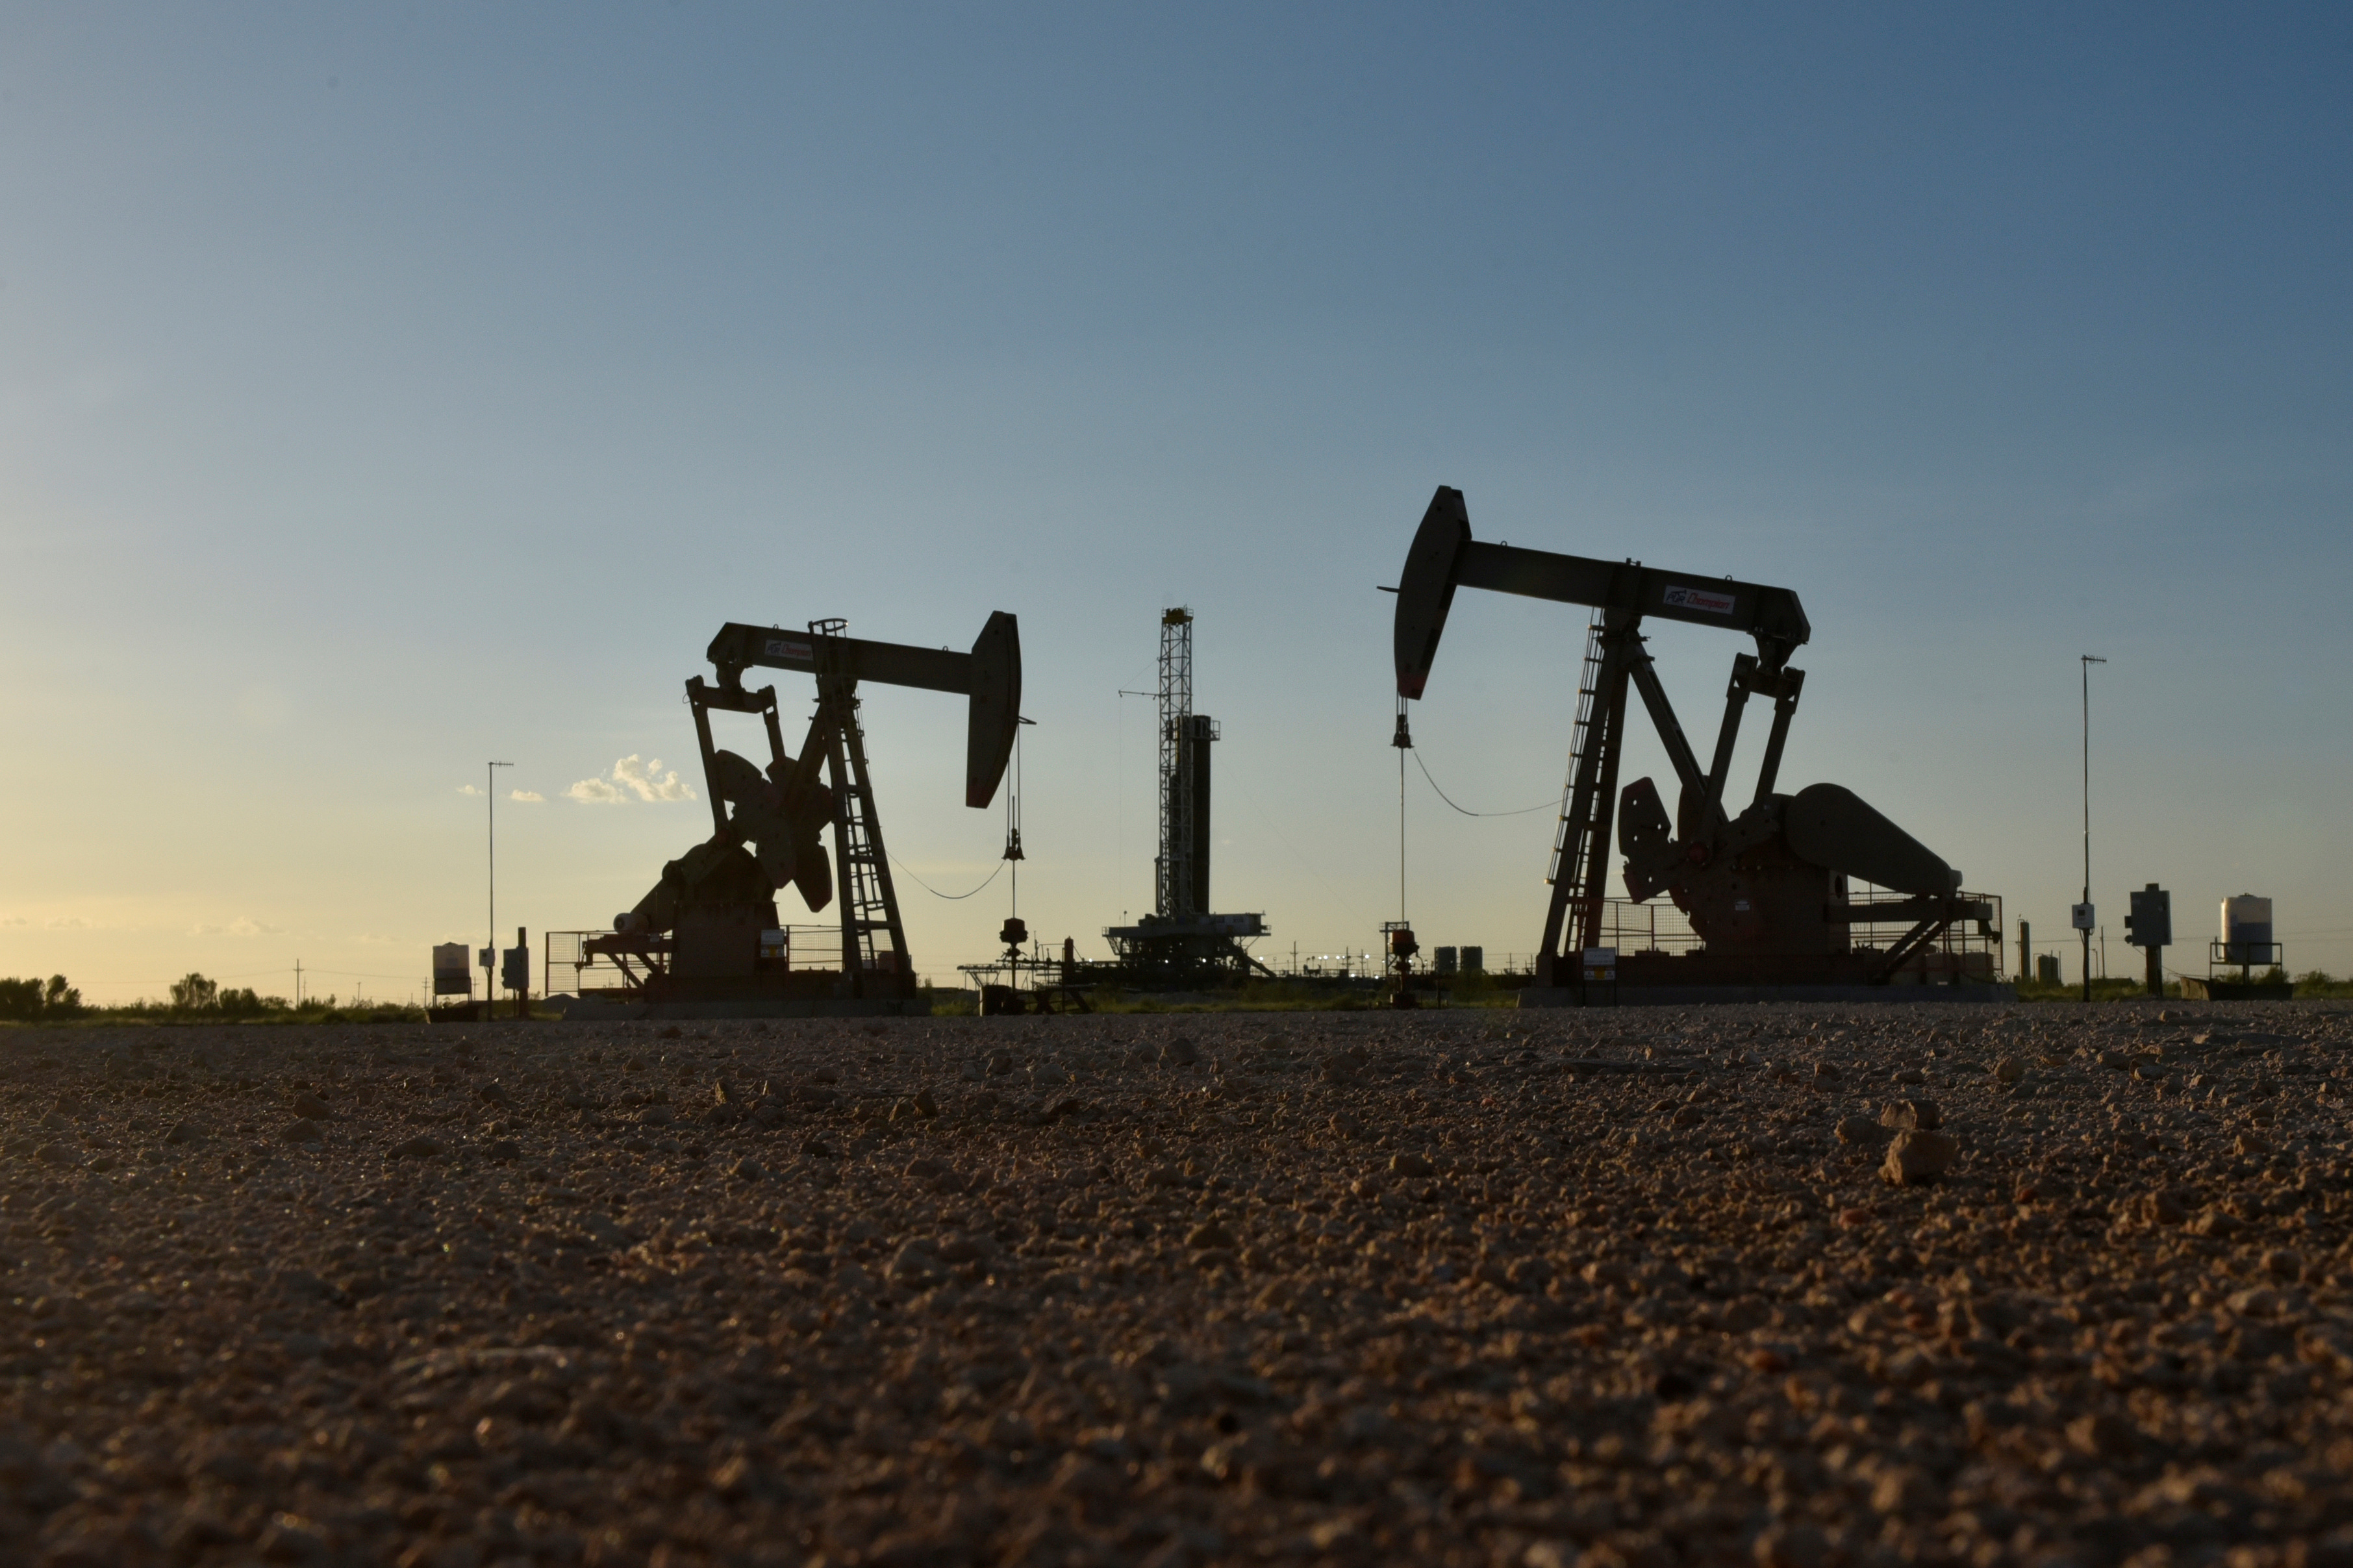 Pump jacks operate in front of a drilling rig in an oil field in Midland, Texas U.S. August 22, 2018. Picture taken August 22, 2018. REUTERS/Nick Oxford/File Photo